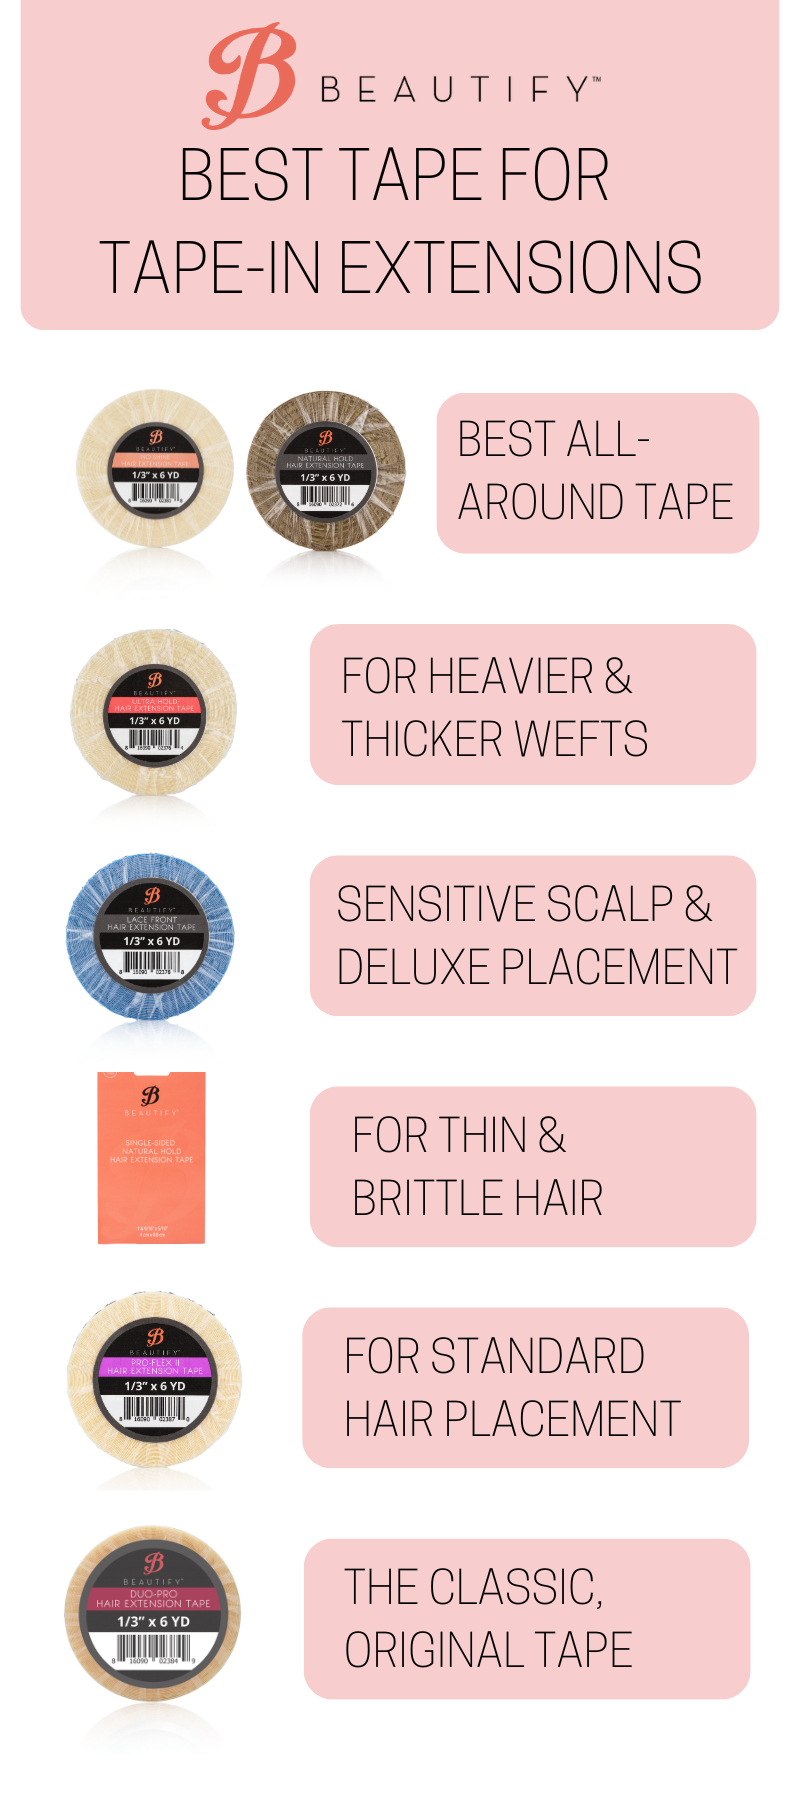 Best Tape for Tape-In Extensions Infographic - infographic